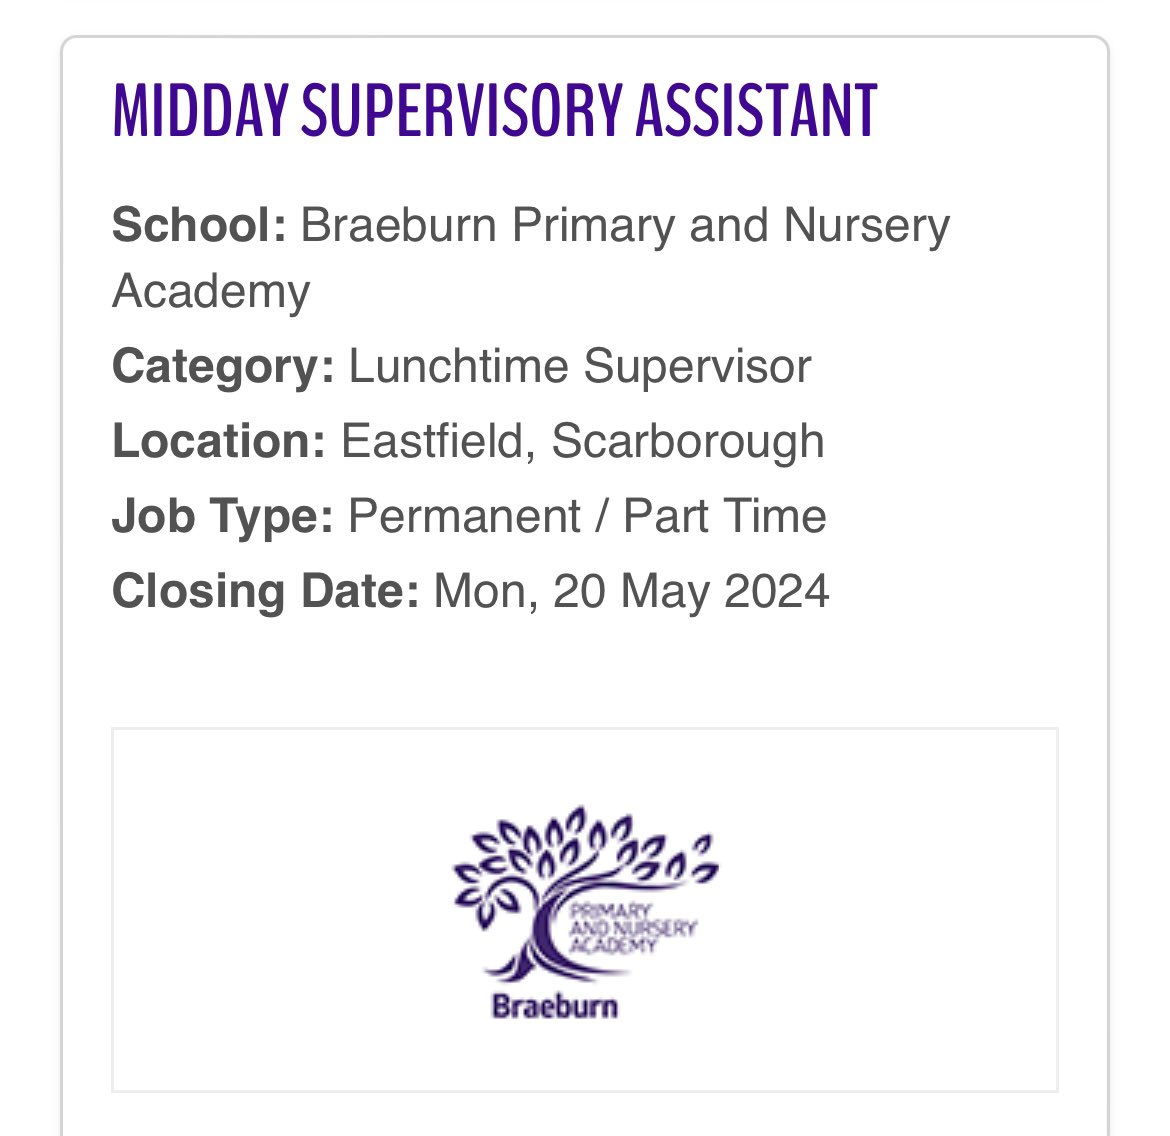 We are recruiting for a Midday Supervisory Assistant! Come and join our team 💜 eboracademytrust.co.uk/vacancy/?Categ…